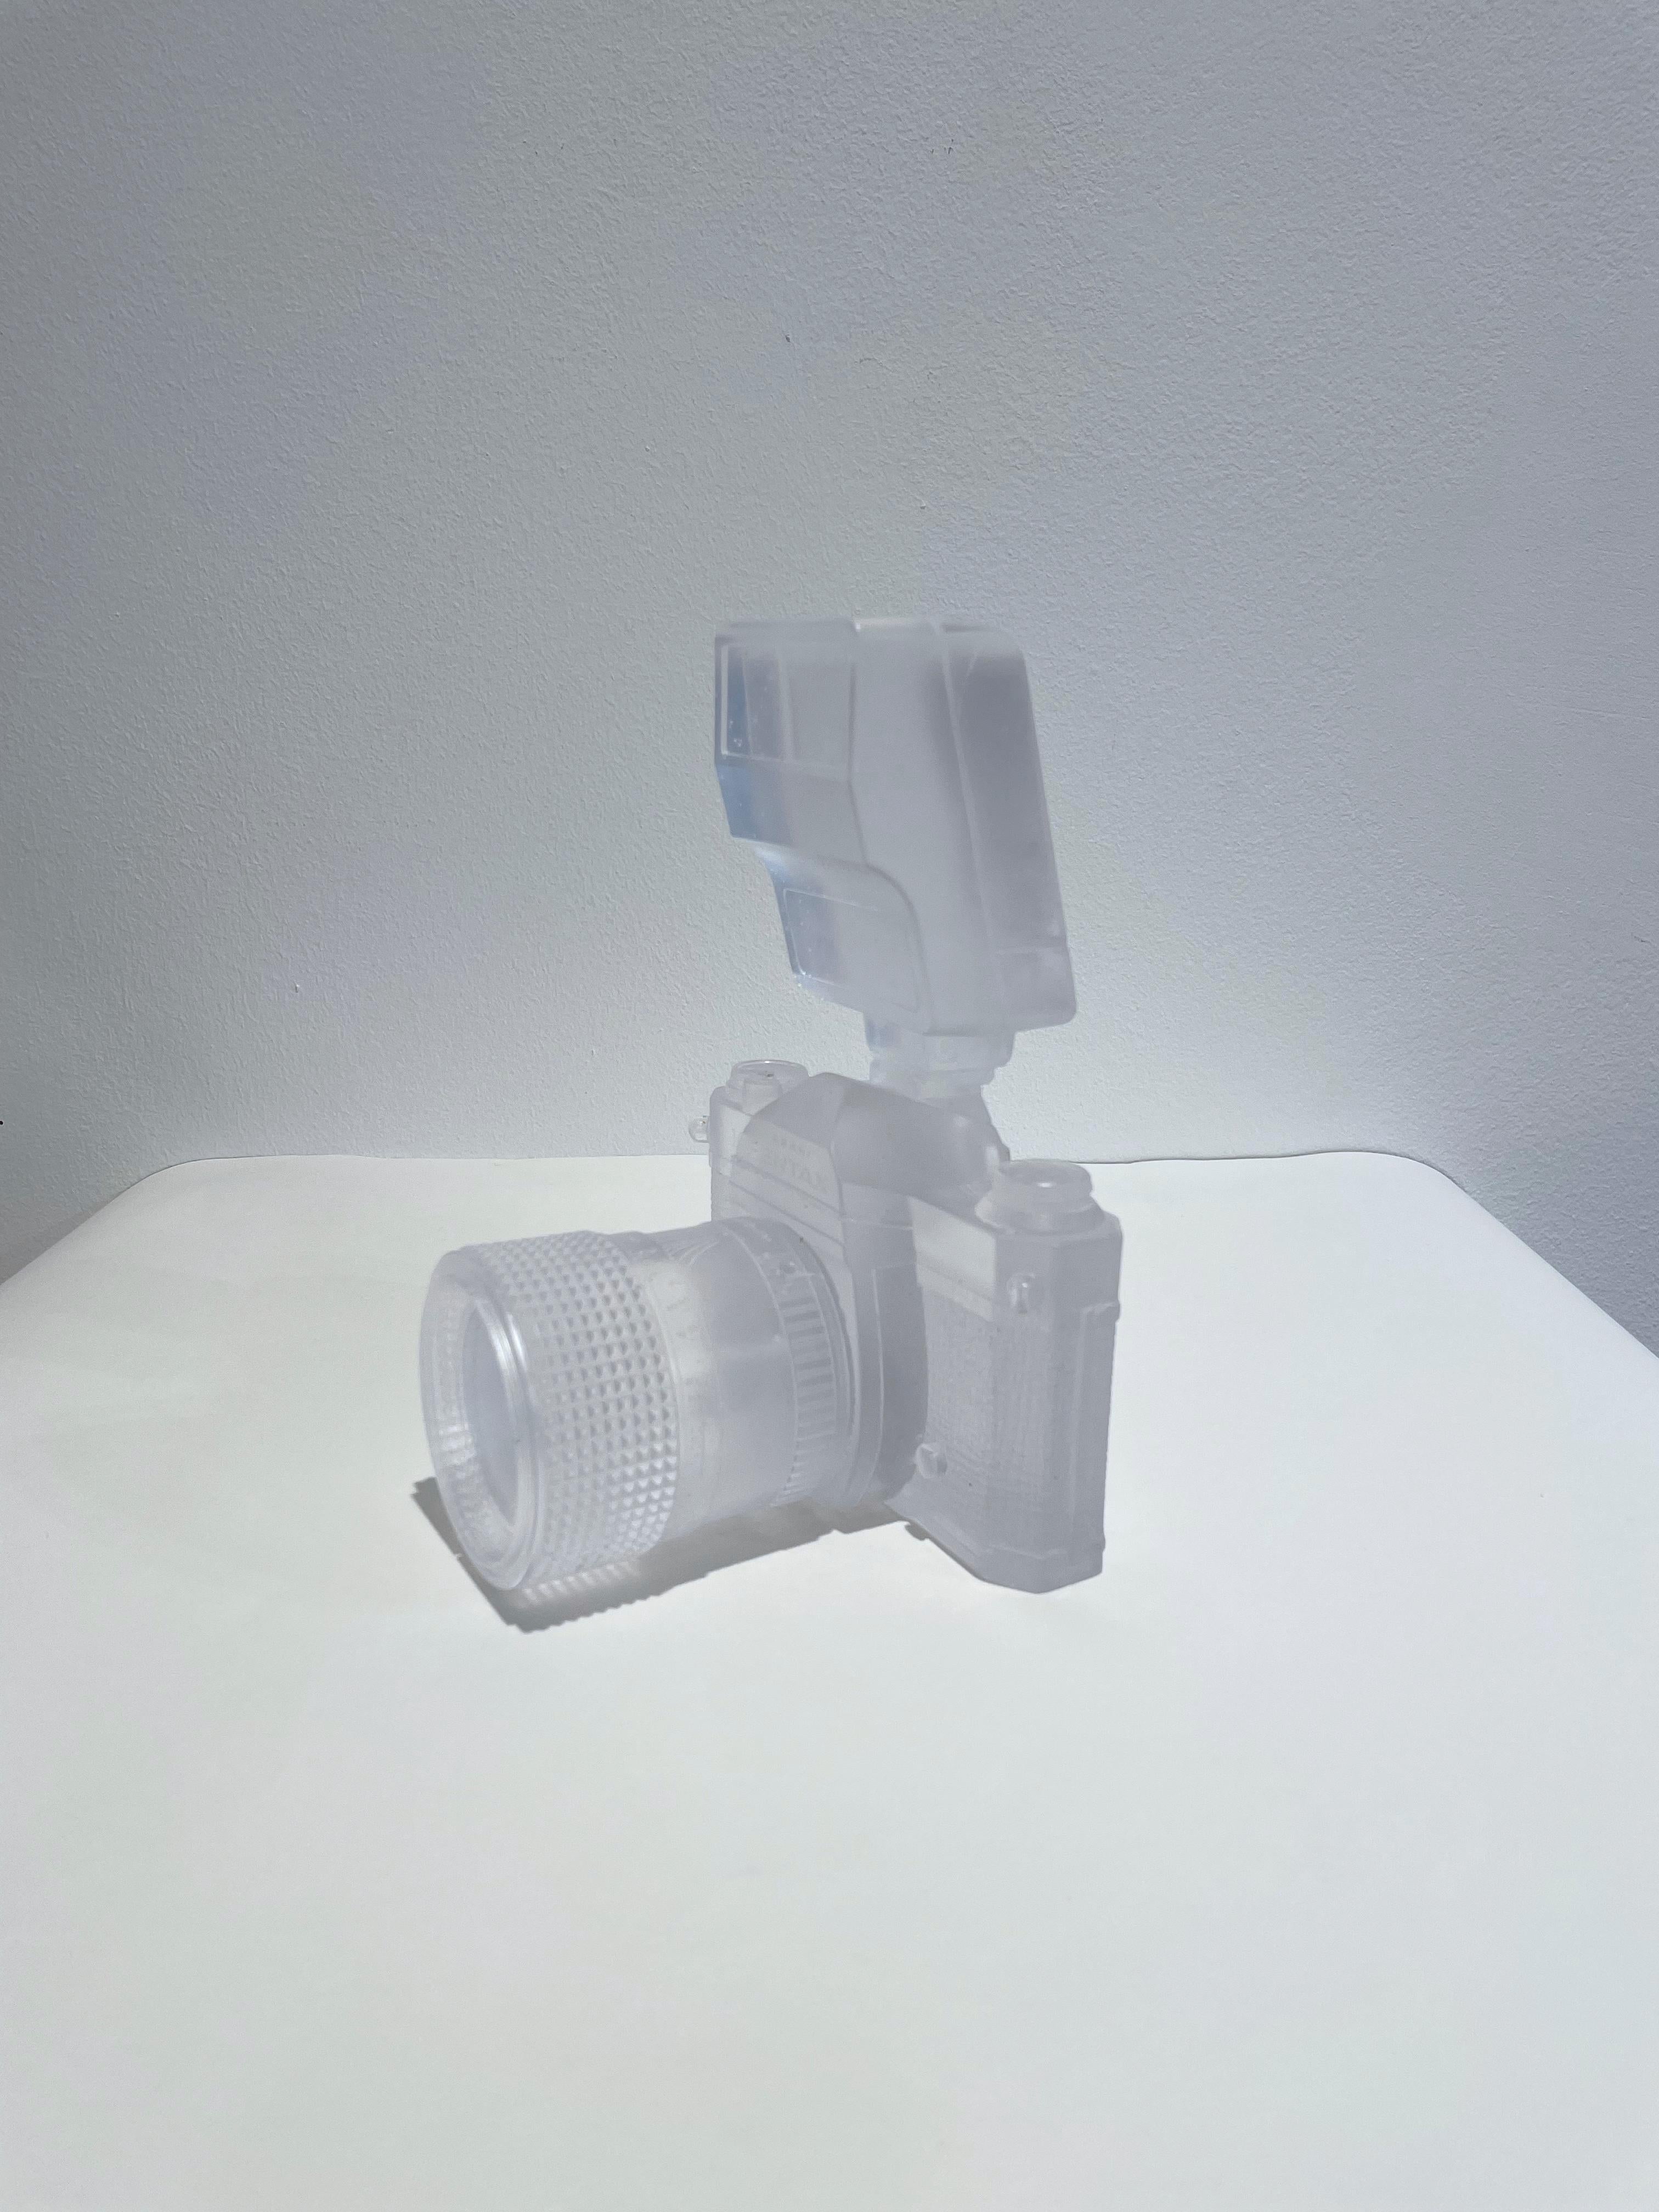 Cast resin 
12 × 15 × 18 cm
Edition of 500
the octagonal box has a hologram on in with the edition number. This is the COA.

Daniel Arsham employs elements of architecture, performance, and sculpture to manipulate and distort understandings of